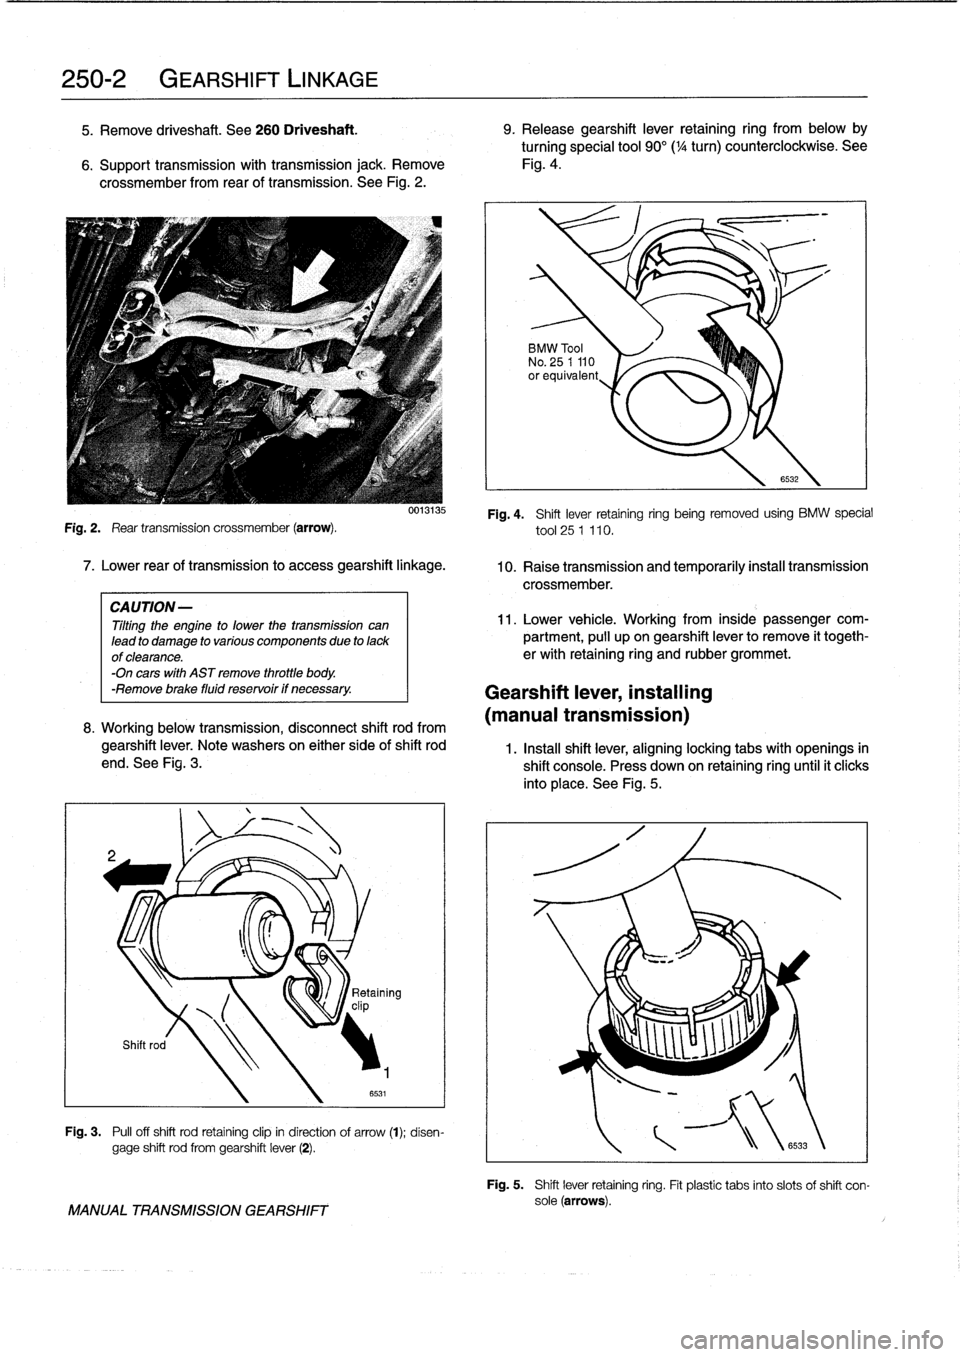 BMW 328i 1998 E36 Owners Manual 
250-2

	

GEARSHIFT
LINKAGE

5
.
Remove
driveshaft
.
See260
Driveshaft
.

	

9
.
Release
gearshift
lever
retaining
ring
from
below
by

turningspecial
tool
90°(
1
/4
turn)
counterclockwise
.
See

6
.